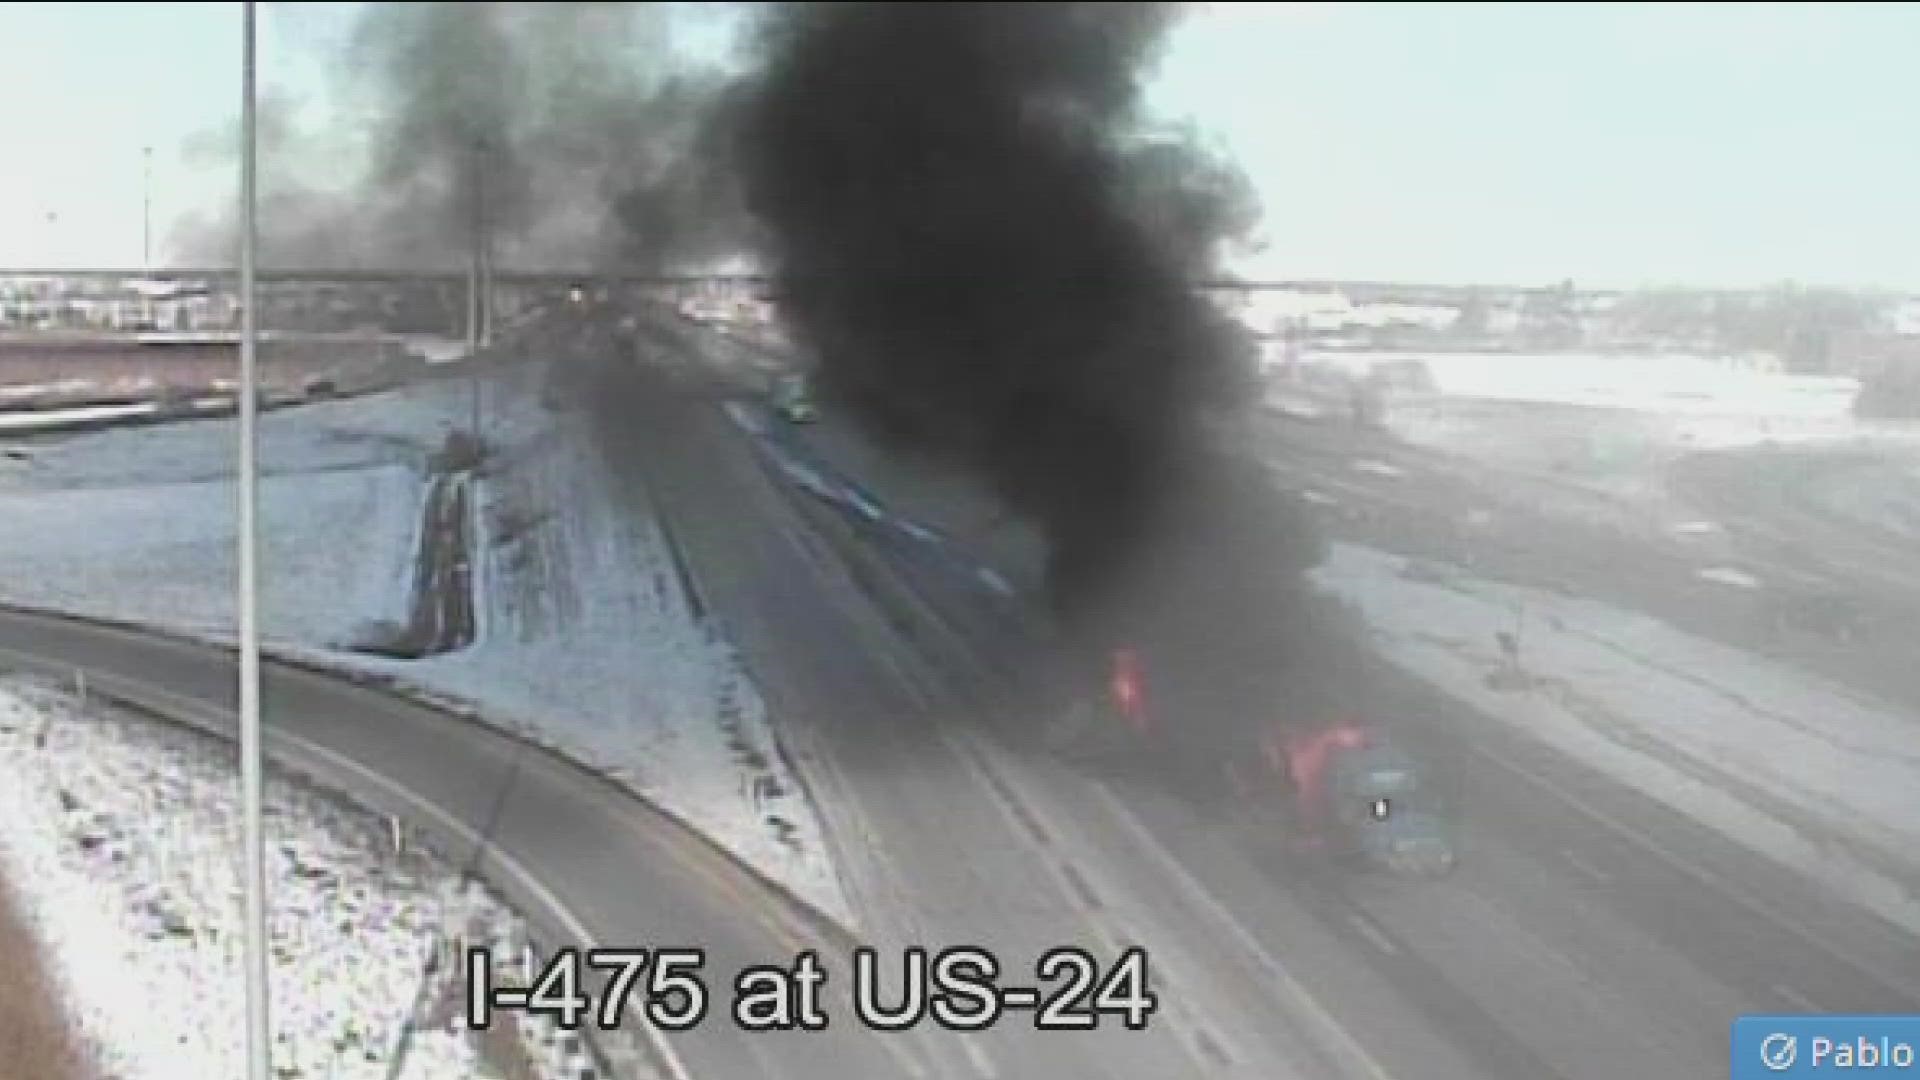 A semi fire on SB I-475 in Maumee closed the roadway in both directions Tuesday afternoon.